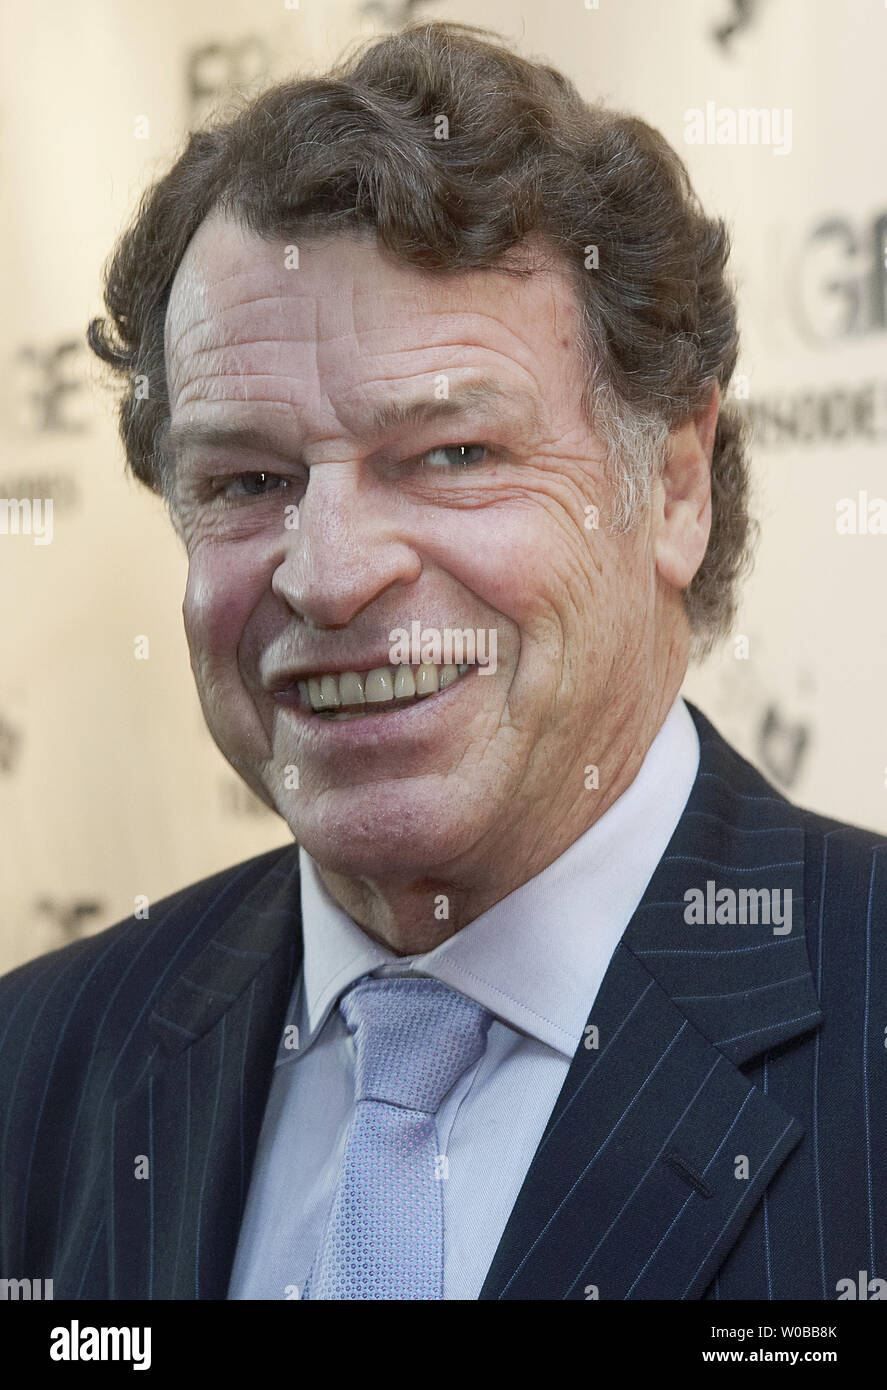 Actor John Noble (as Dr. Walter Bishop) arrives on the red carpet for the 100th Episode Celebration of the Fringe Television Series at the Fairmont Pacific Rim Hotel in Vancouver, British Columbia, December 1, 2012.    UPI Photo /Heinz Ruckemann Stock Photo